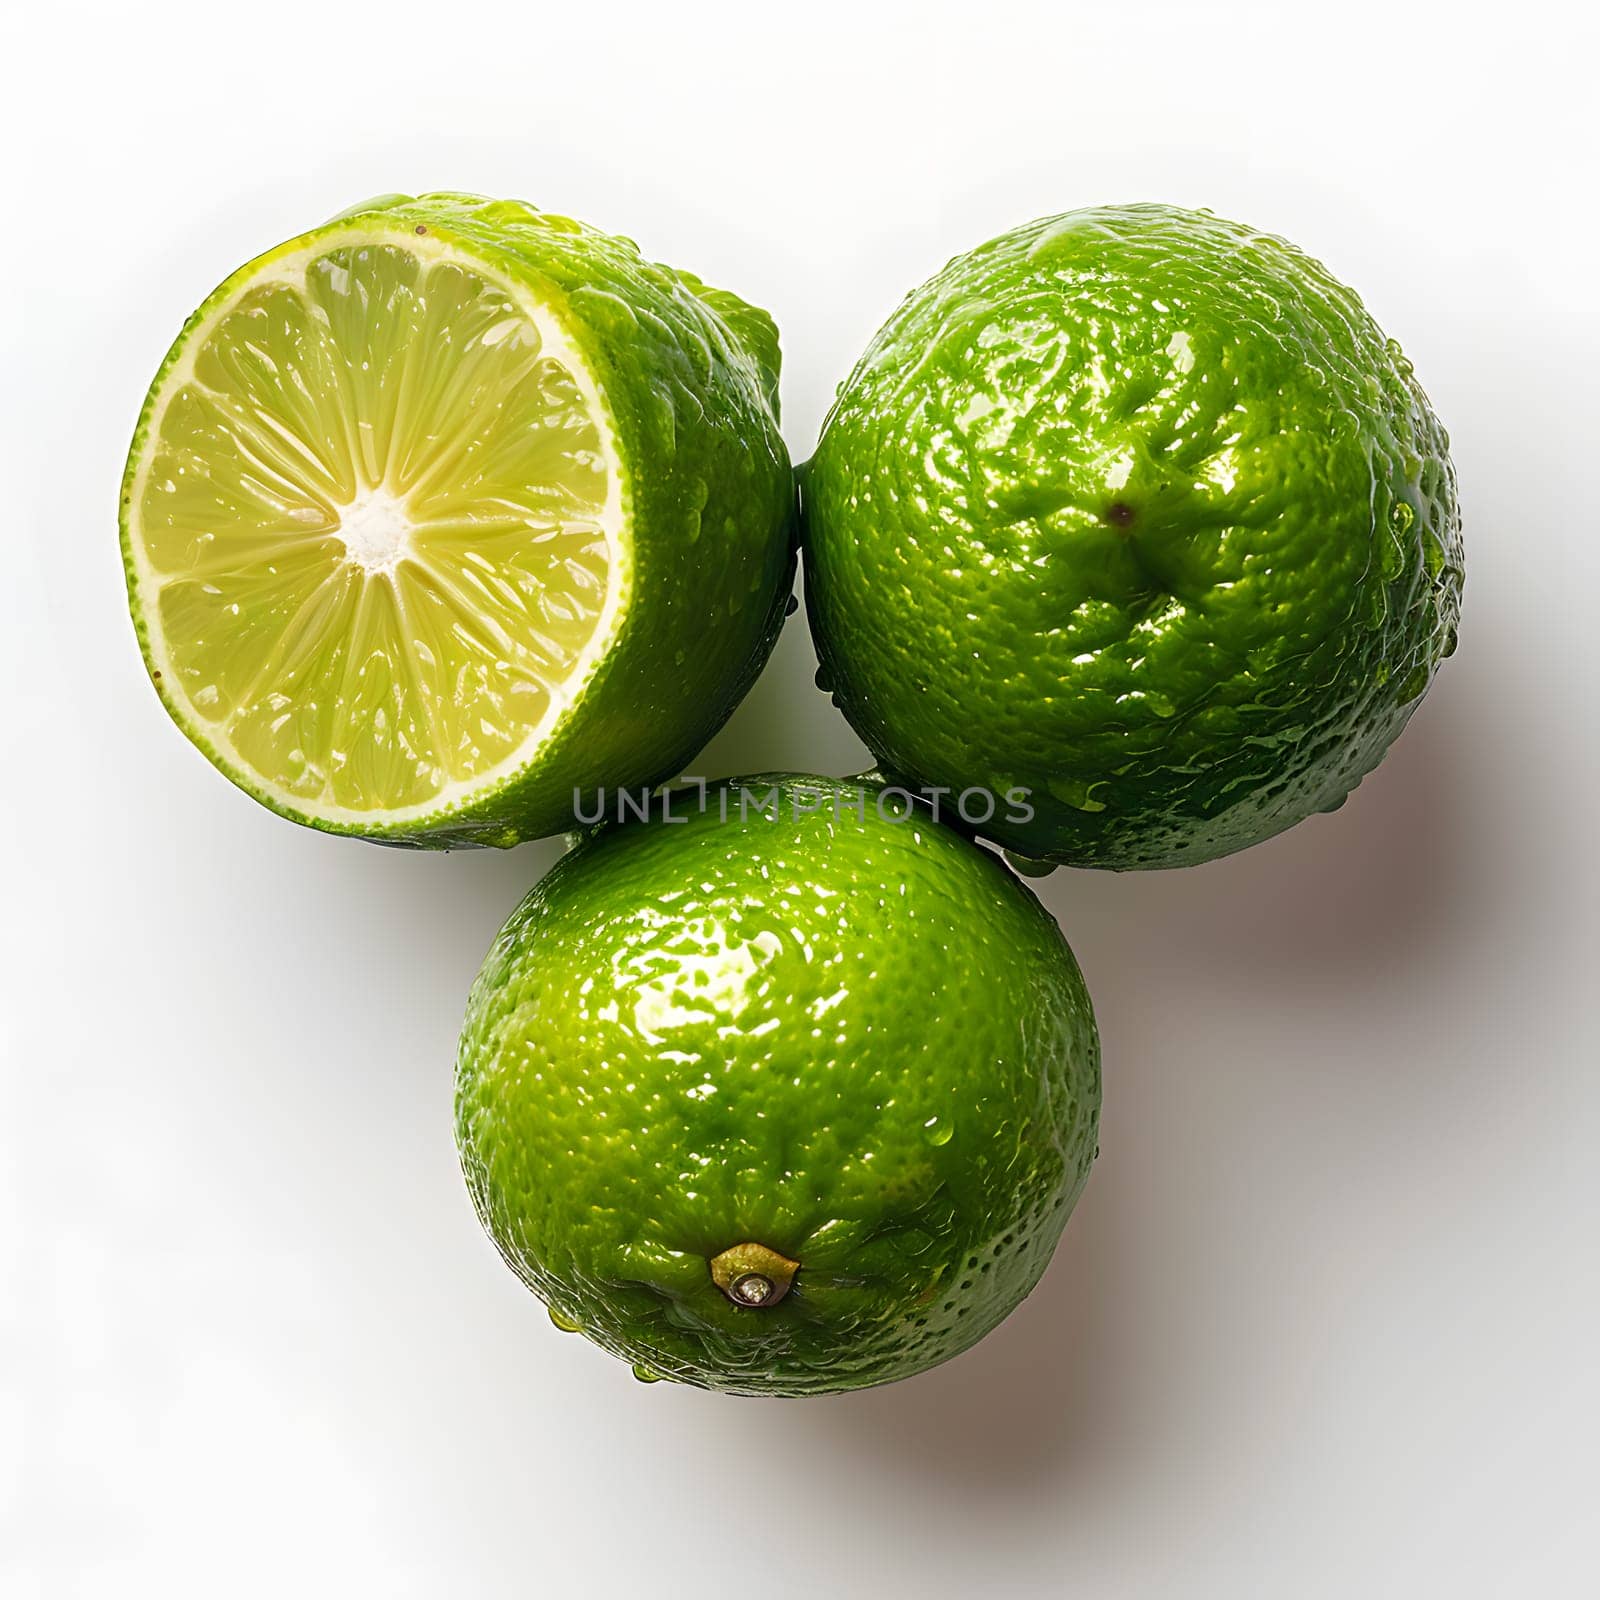 three limes are sitting next to each other on a white surface by Nadtochiy